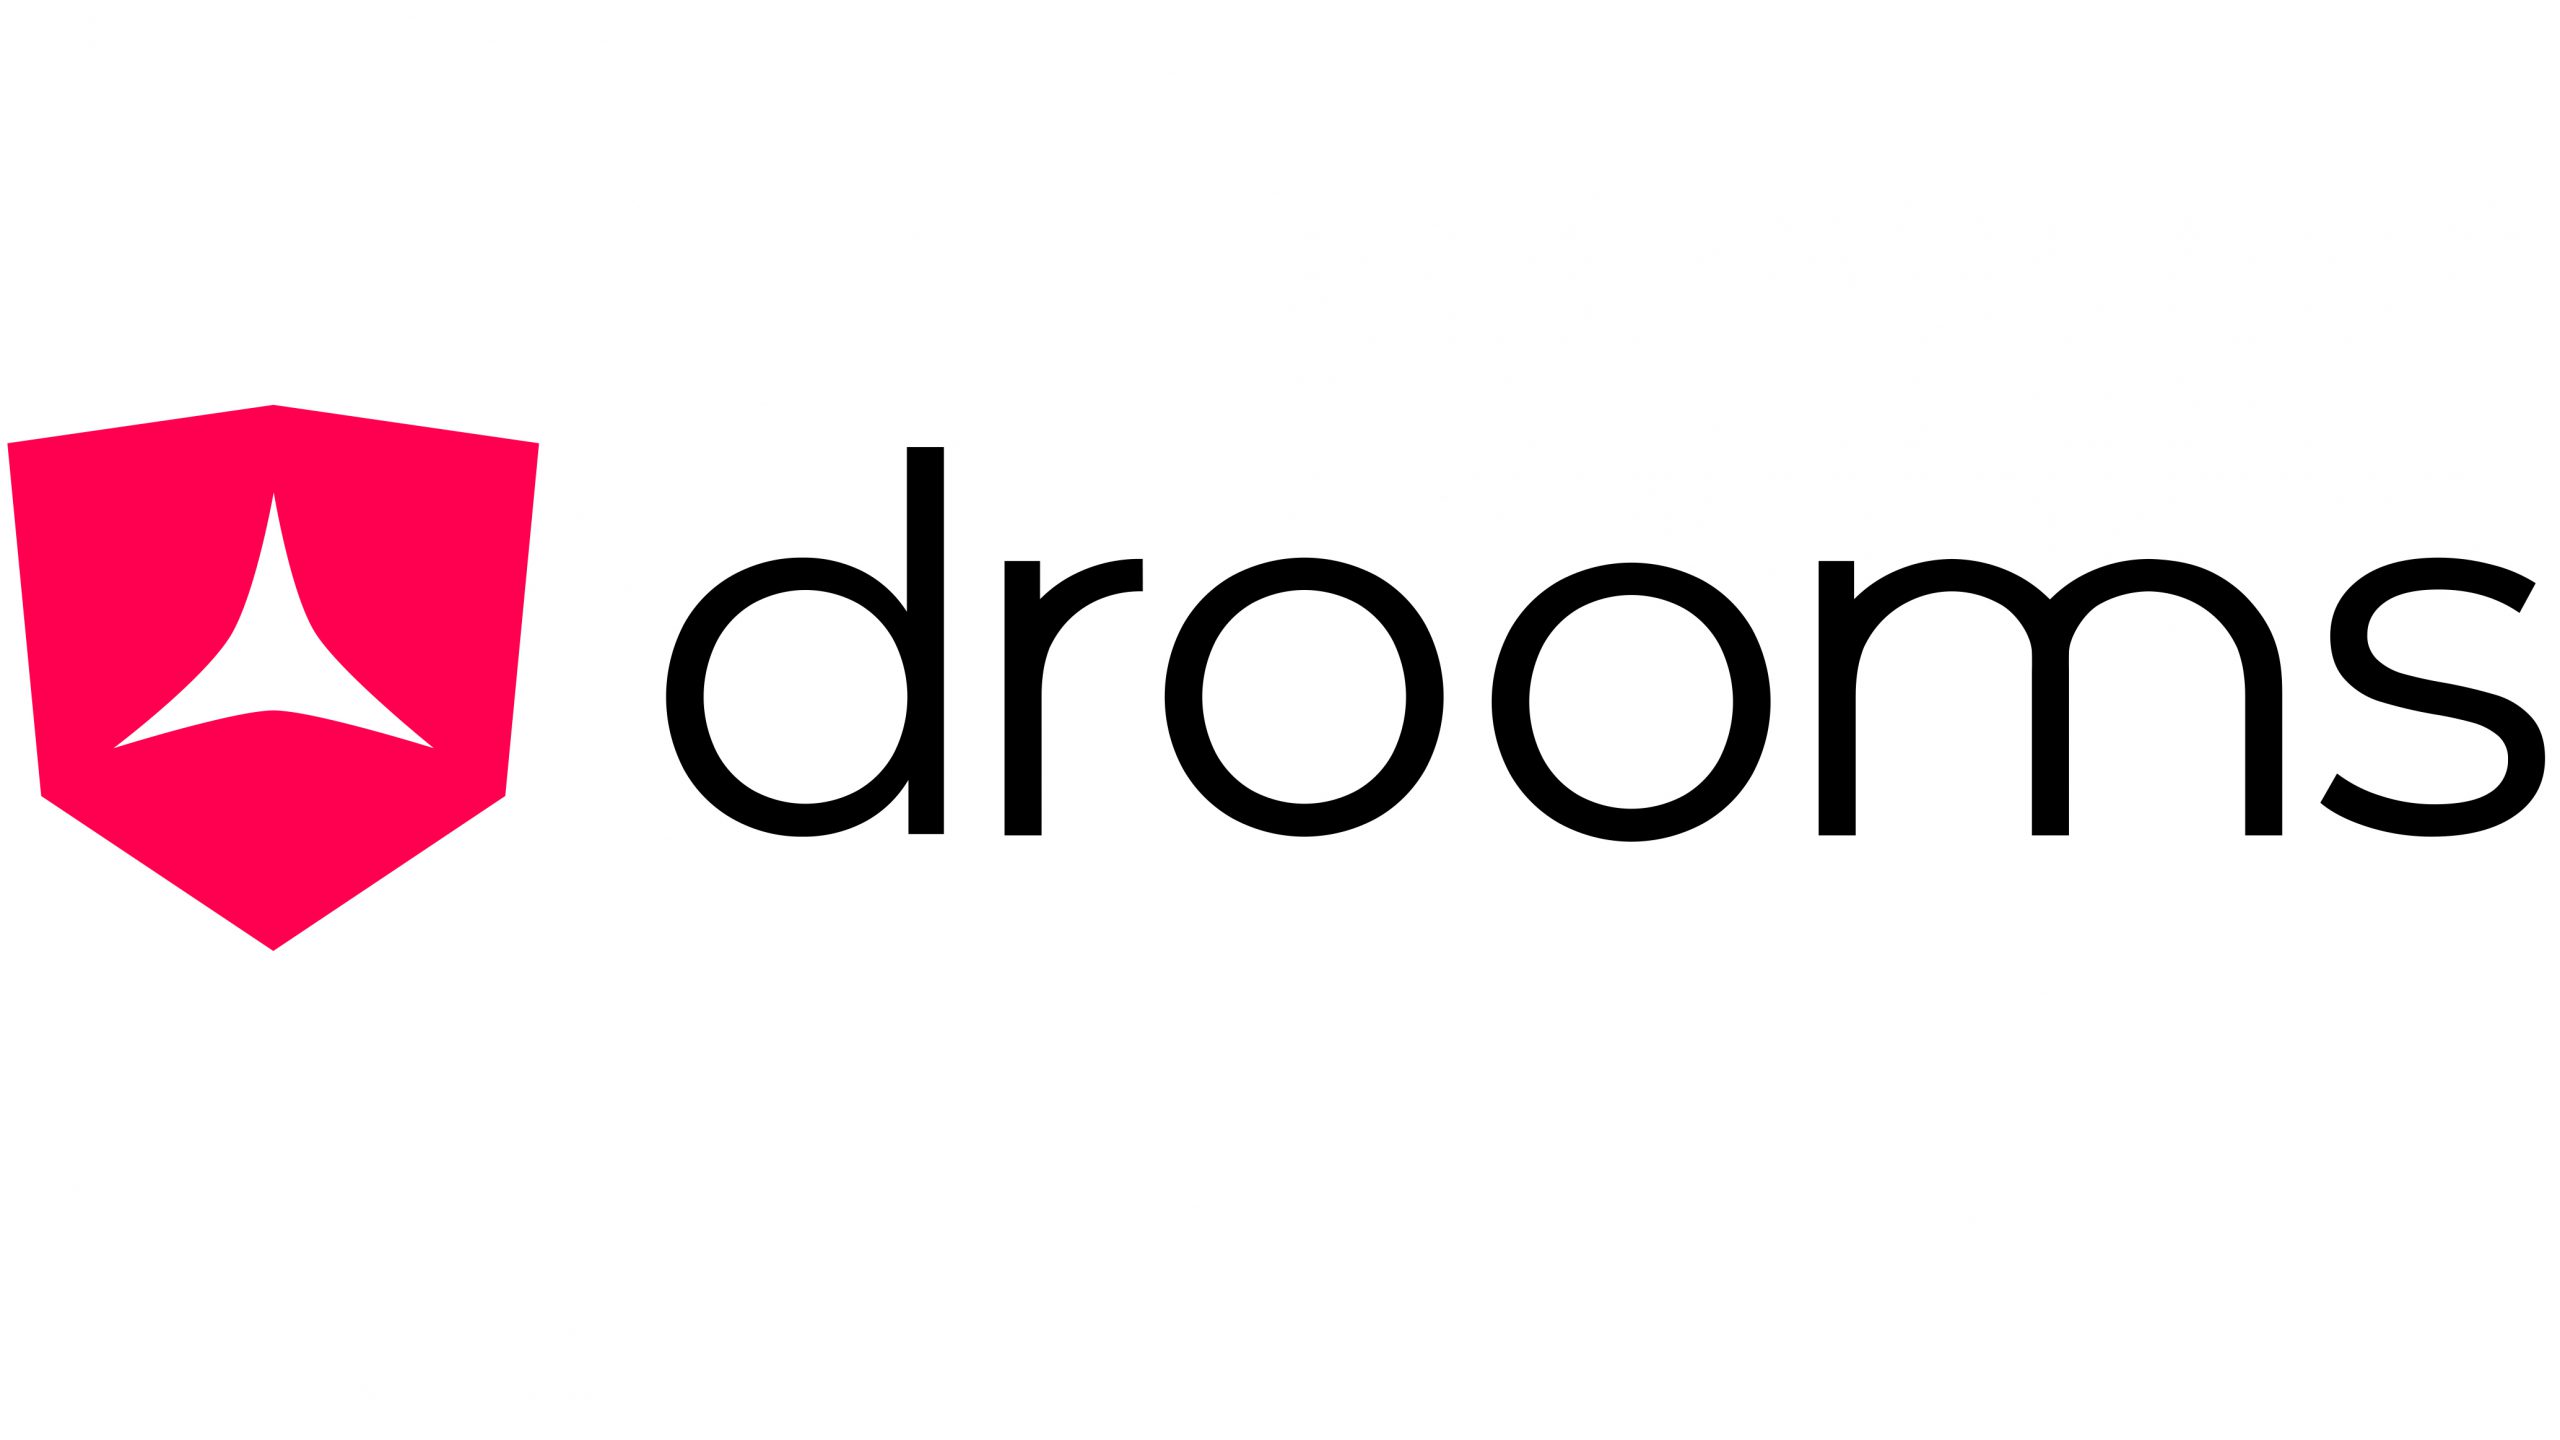 drooms